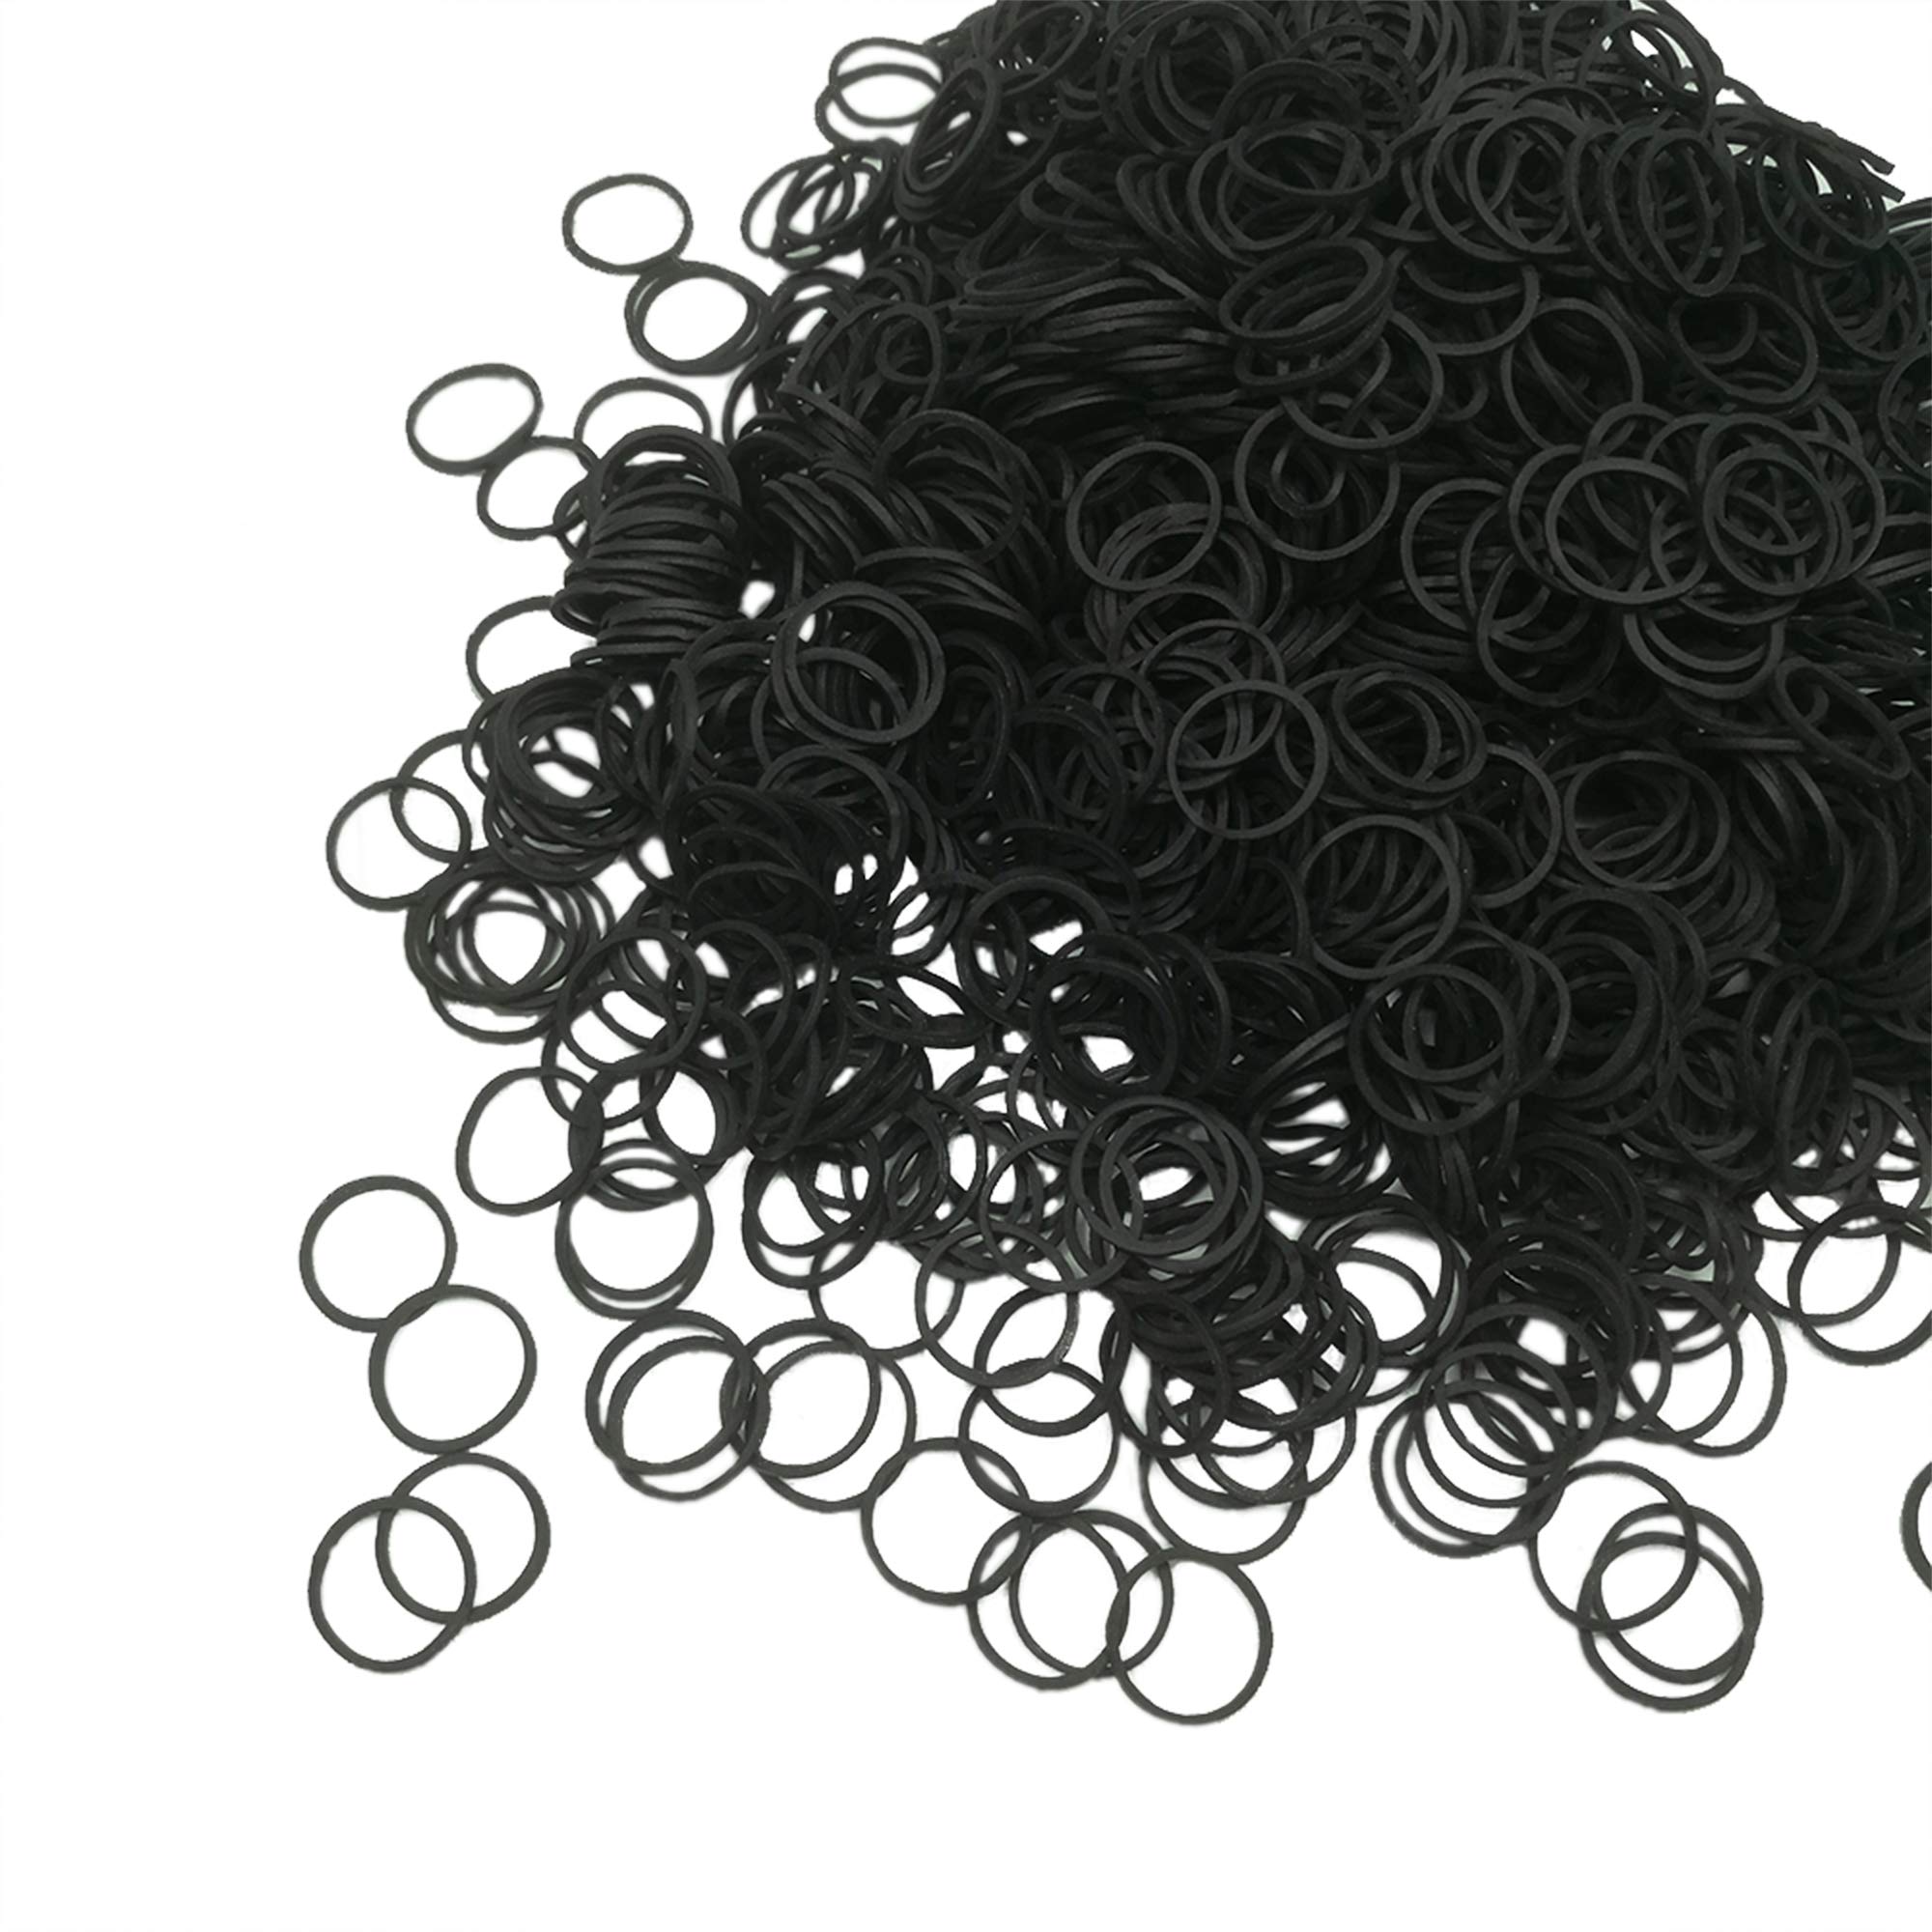 Mini Rubber Bands Soft Elastic Bands Premium Small Tiny Black Rubber Bands  for Kids Hair Braids Hair Wedding Hairstyle (1000 Pieces Black)